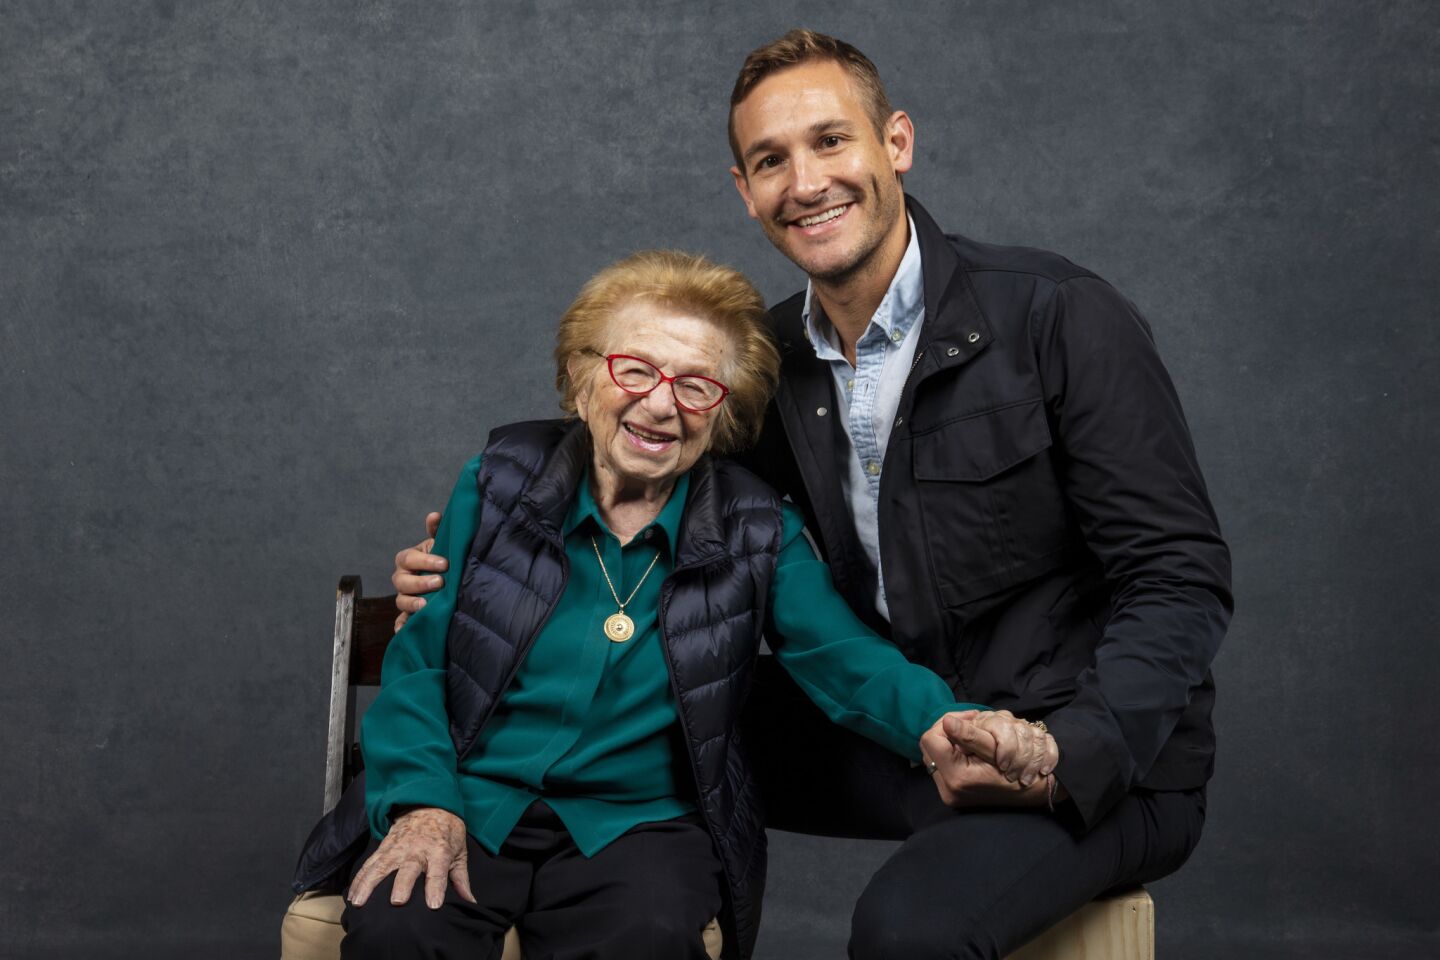 Subject Ruth Westheimer and director Ryan White from the documentary "Ask Dr. Ruth."